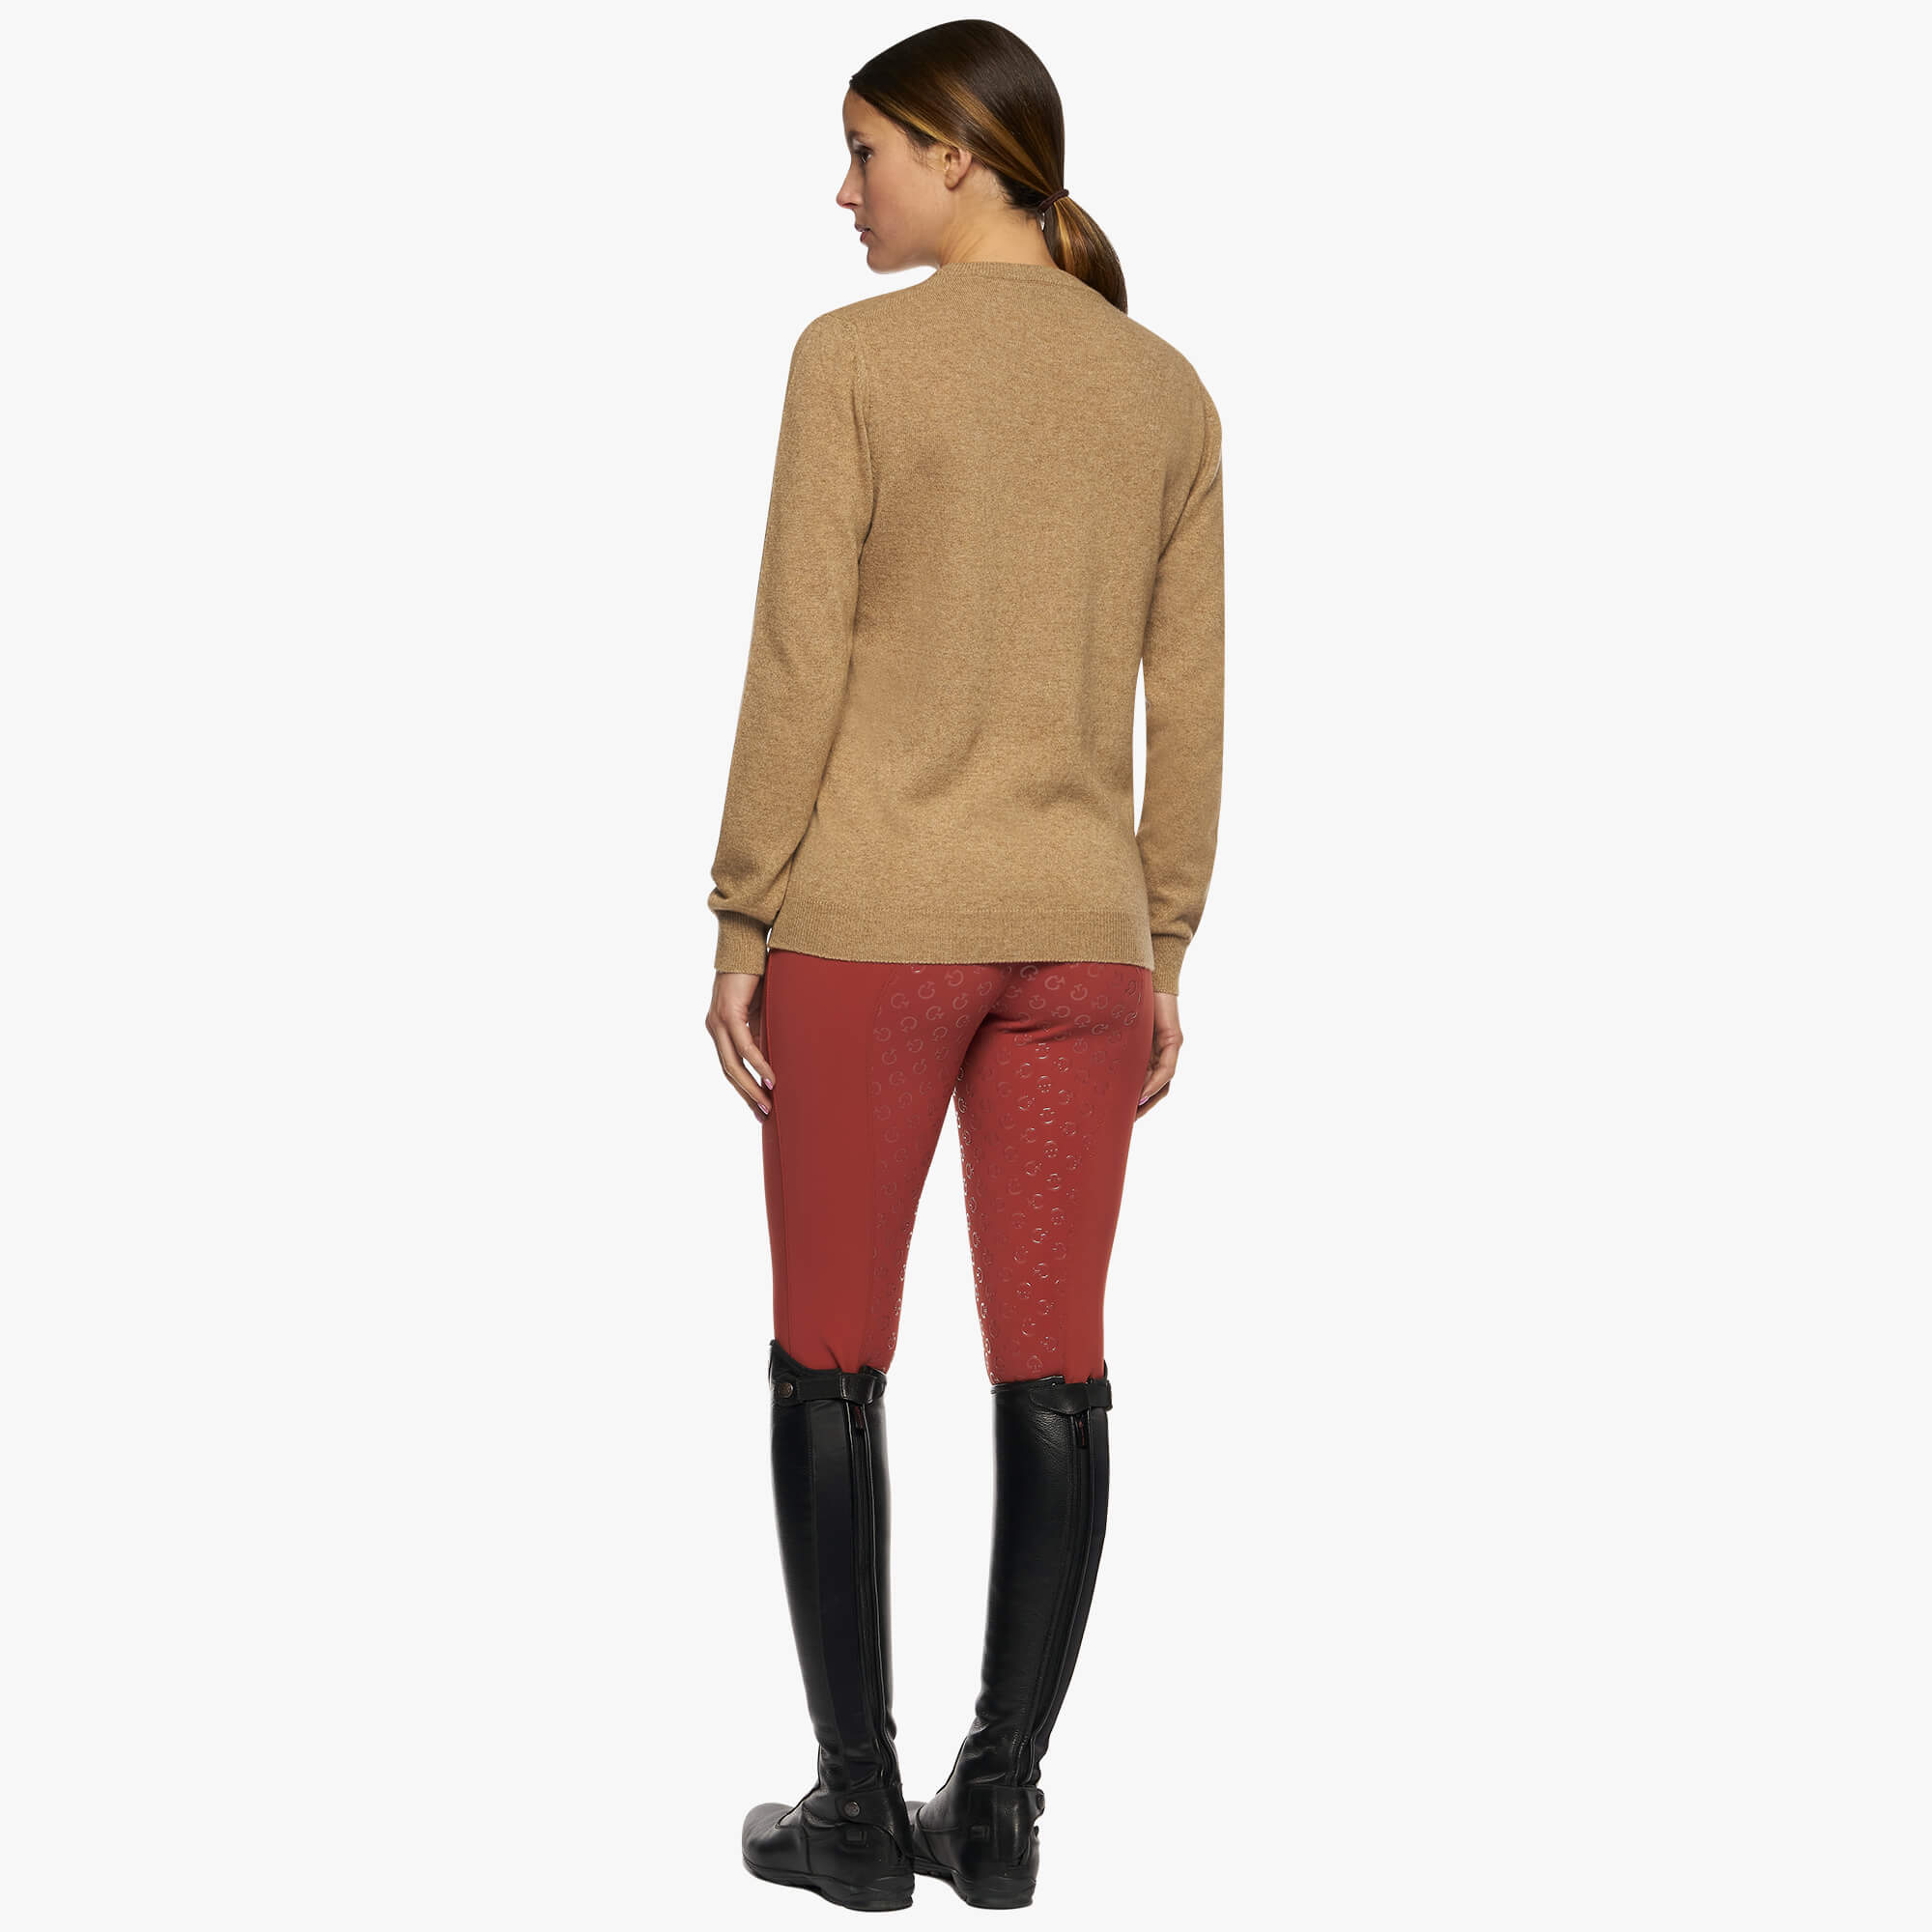 Women's sweater MAD116 made of cashmere